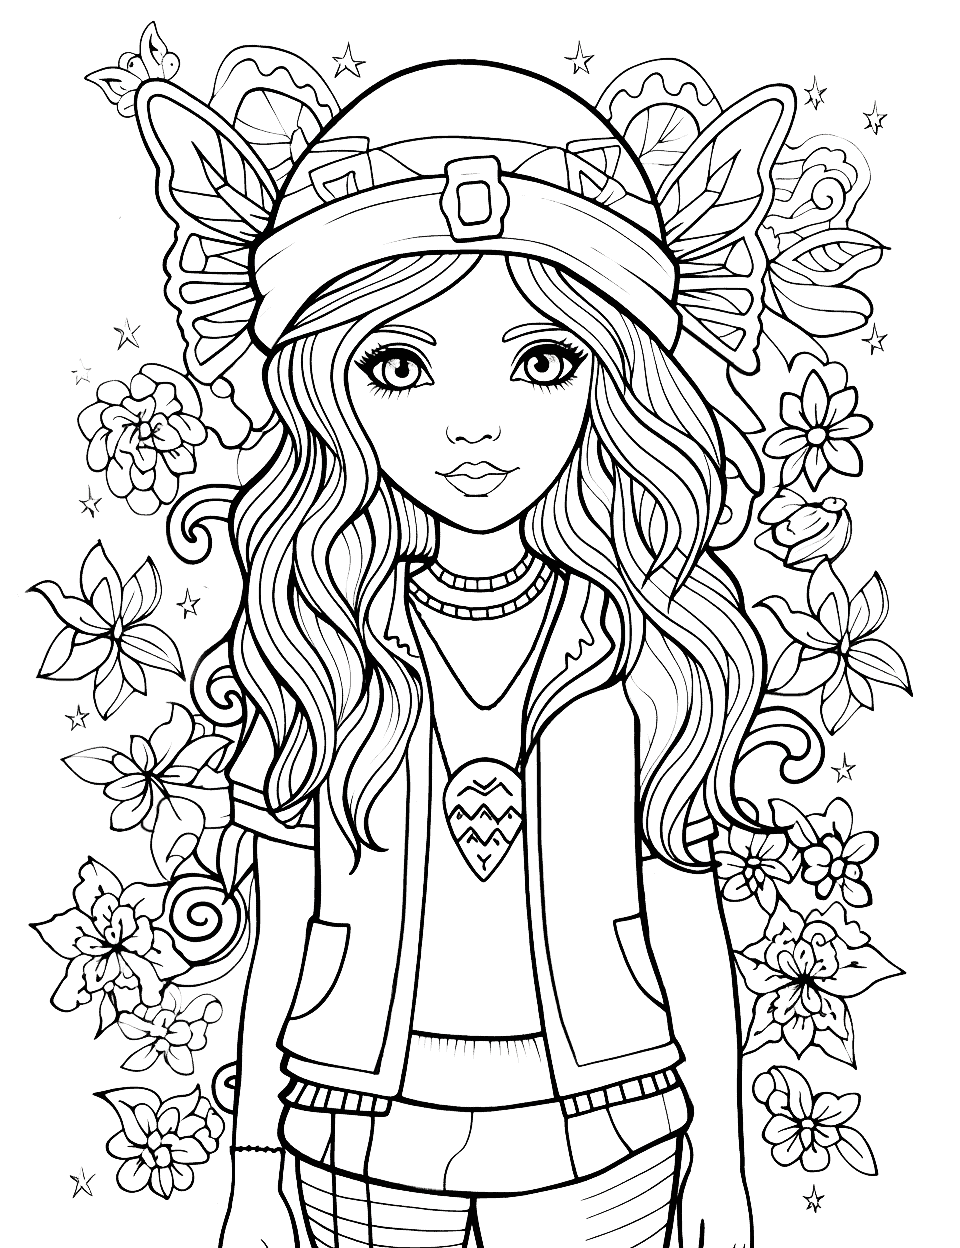 Mystical Fashion Diva Adult Coloring Page - A fashionable girl dressed in mystical-themed outfits.